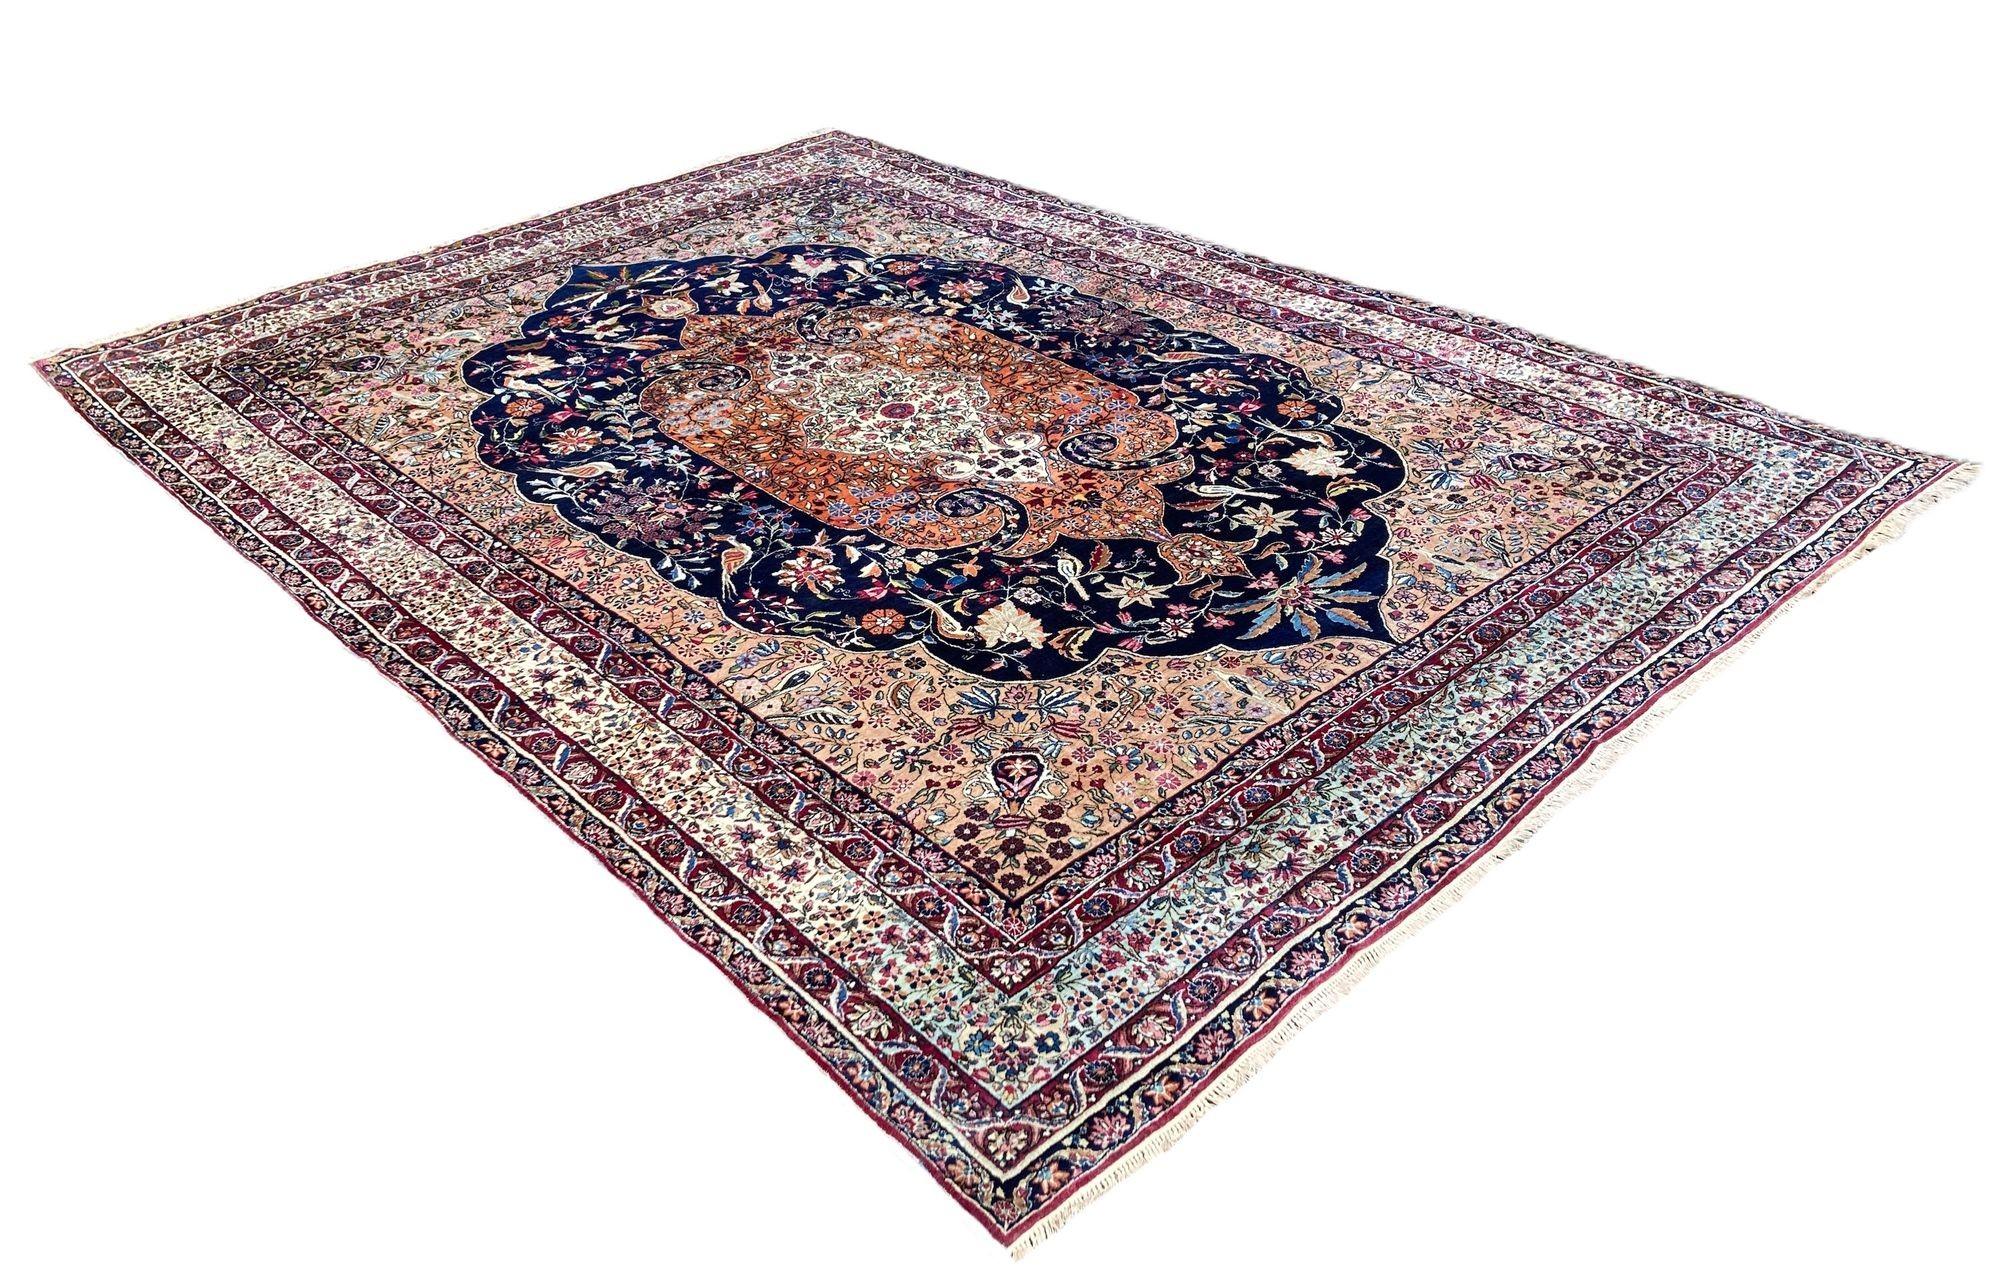 Antique Kirman Lavar Carpet In Good Condition For Sale In St. Albans, GB